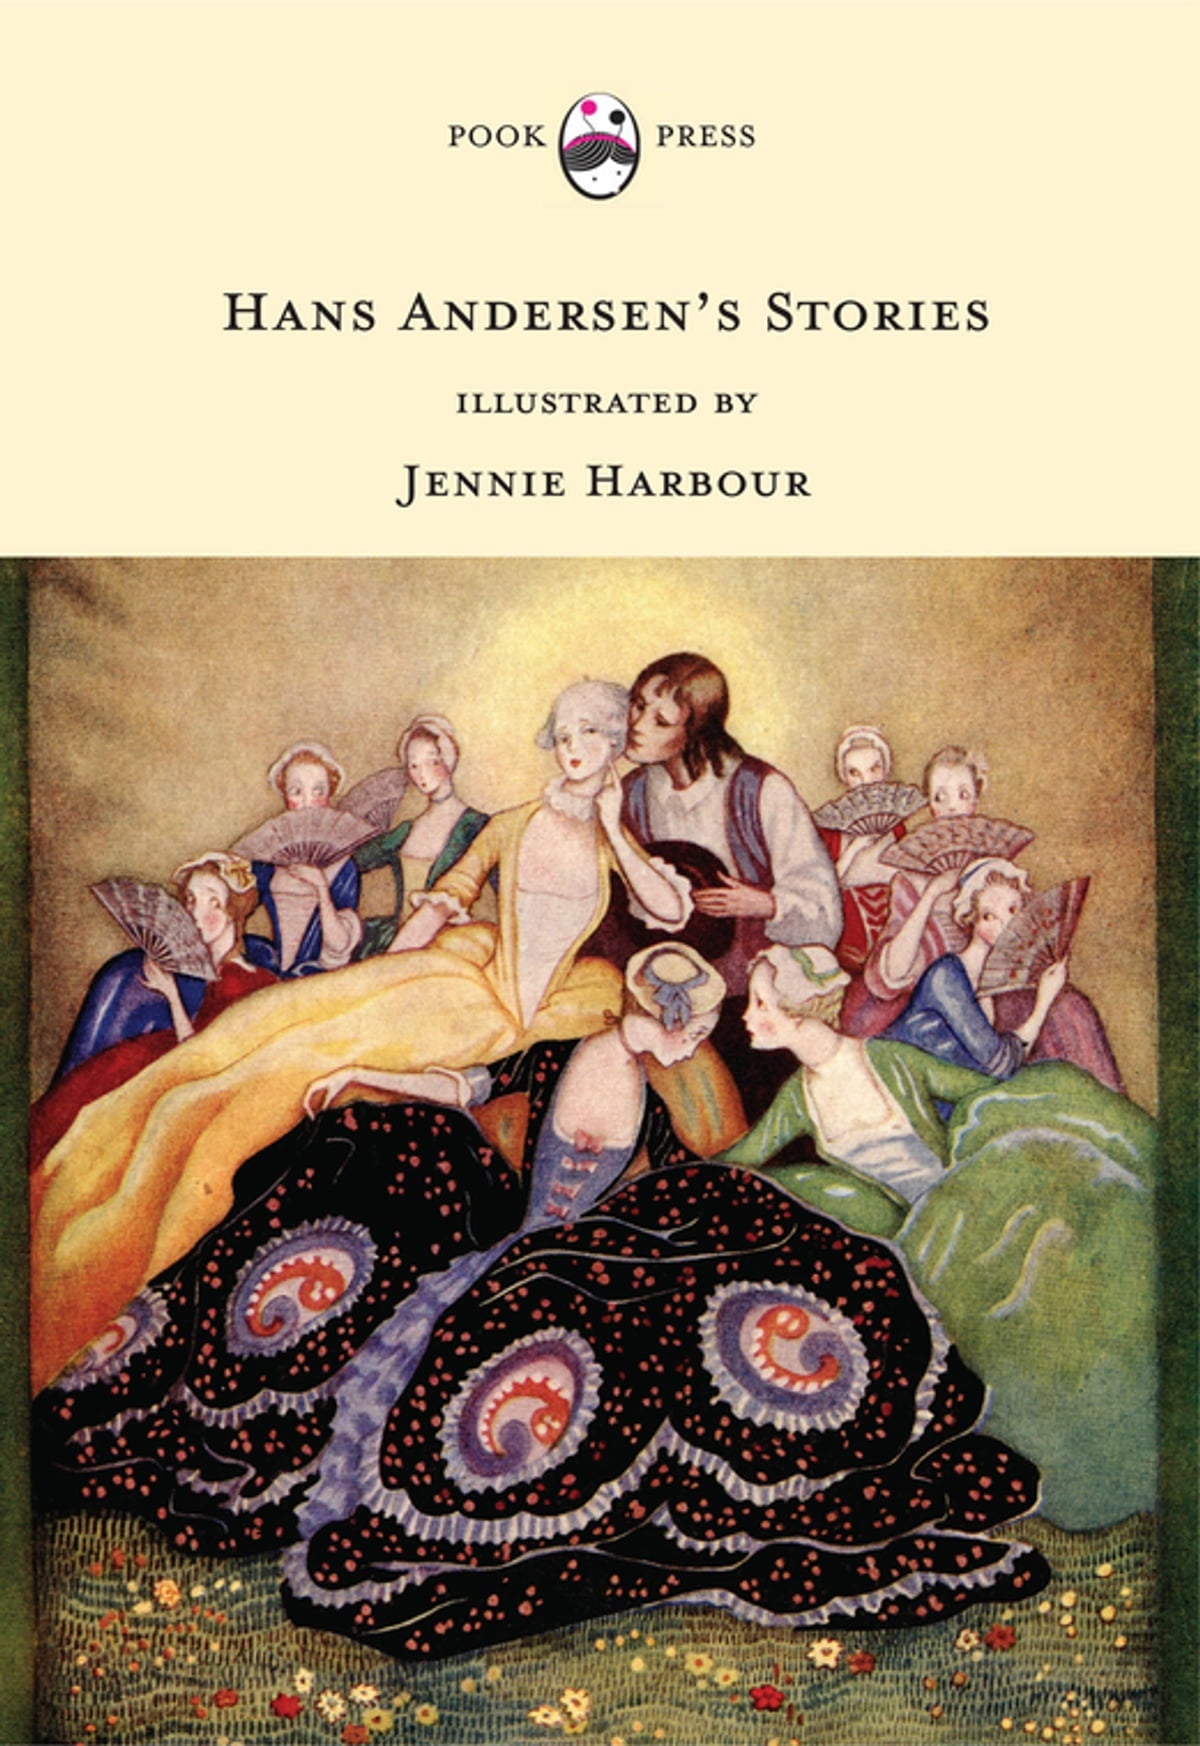 Hans Andersen's Stories, illustrated by Jennie Harbour